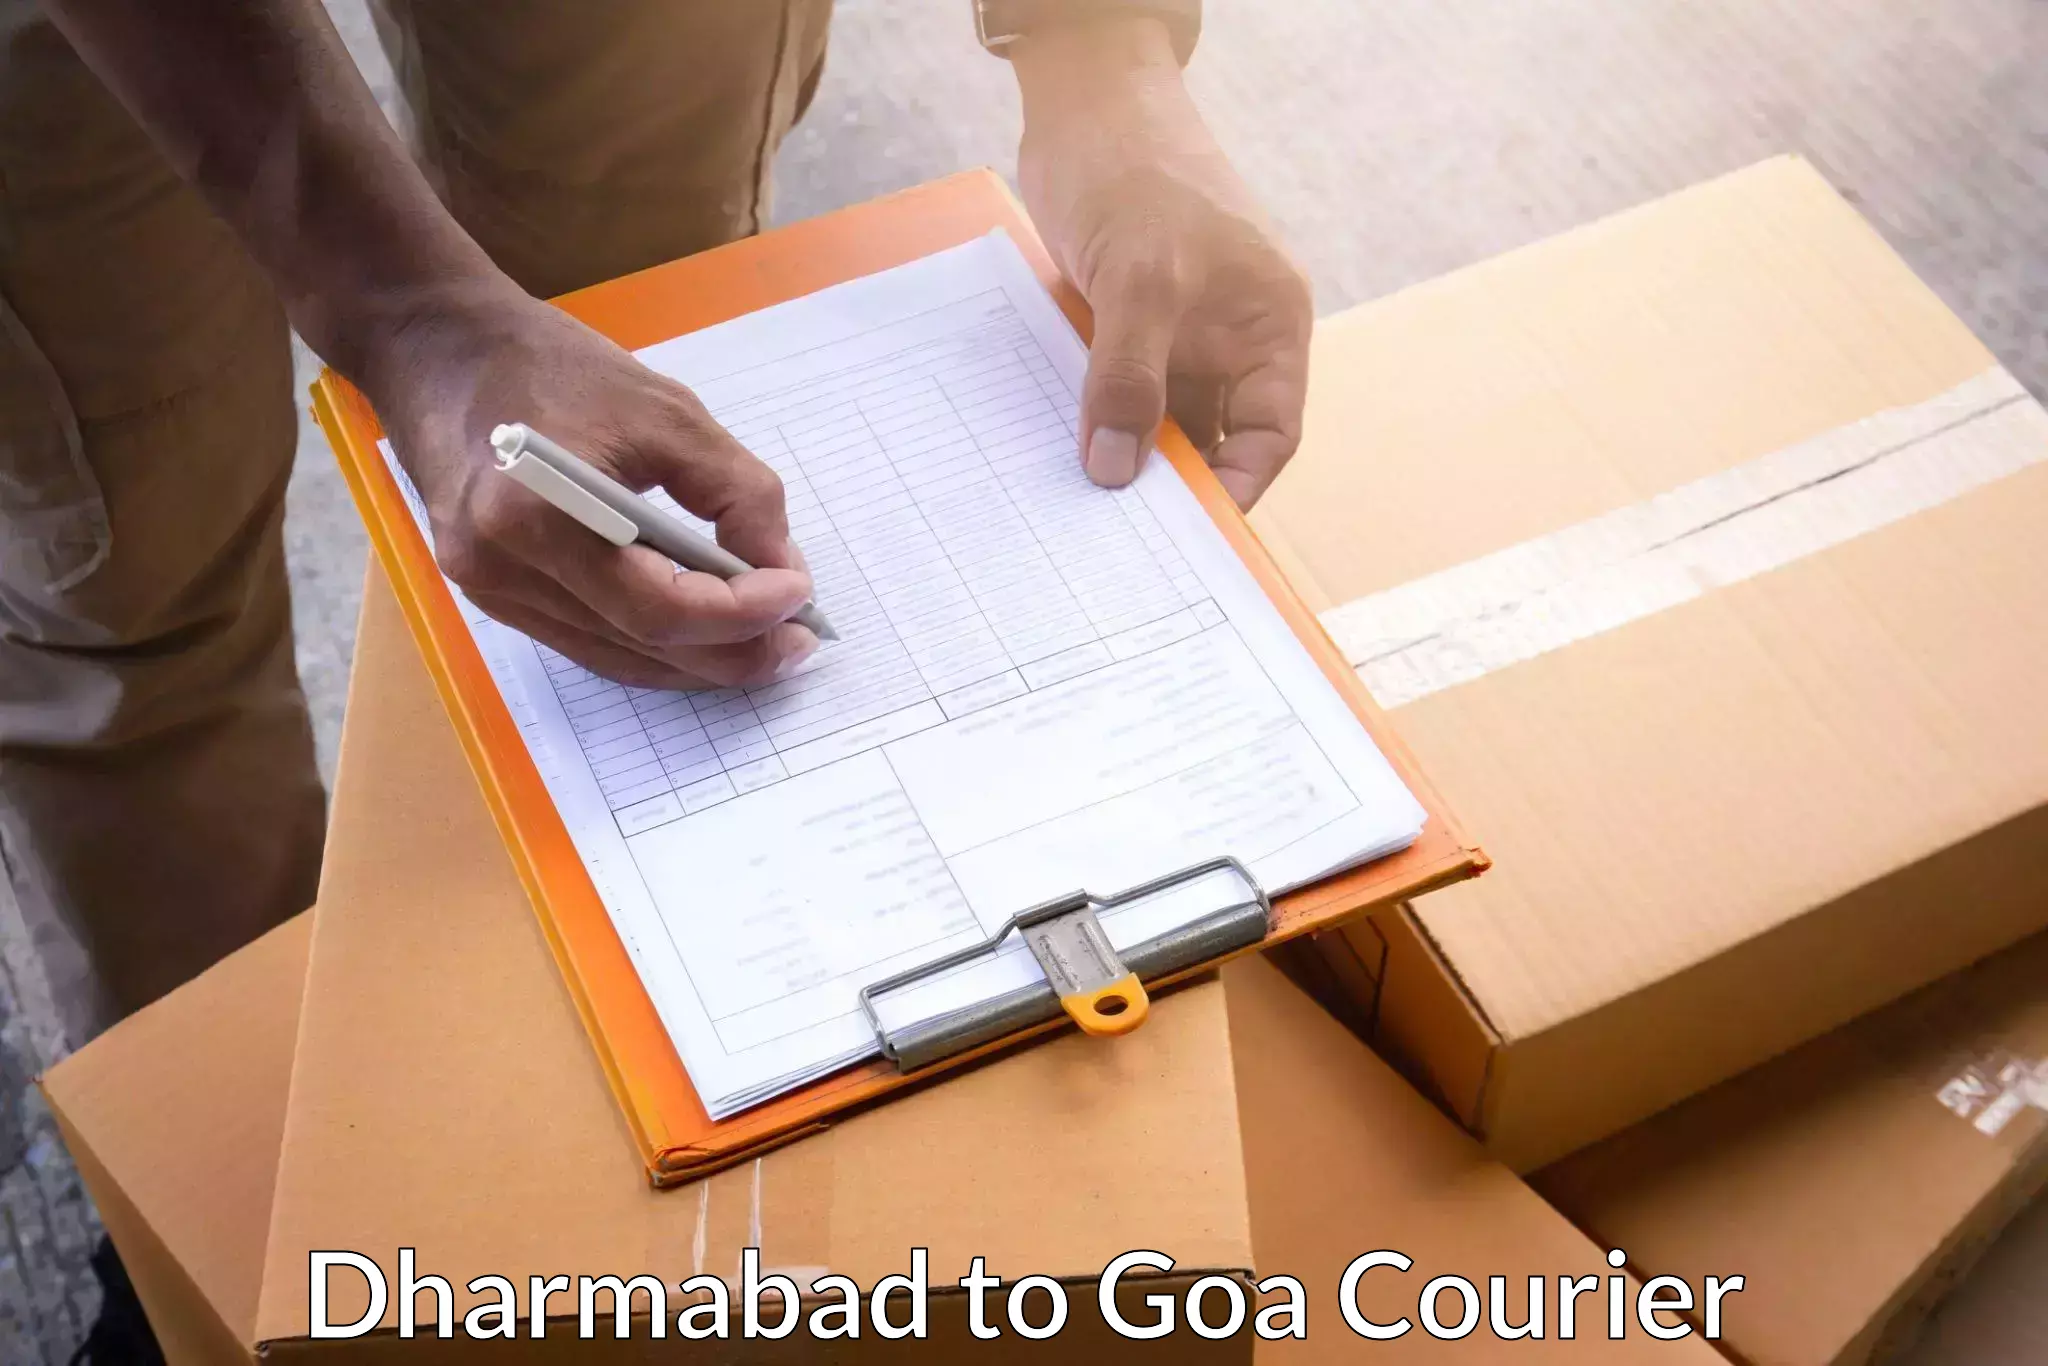 Courier service innovation Dharmabad to Goa